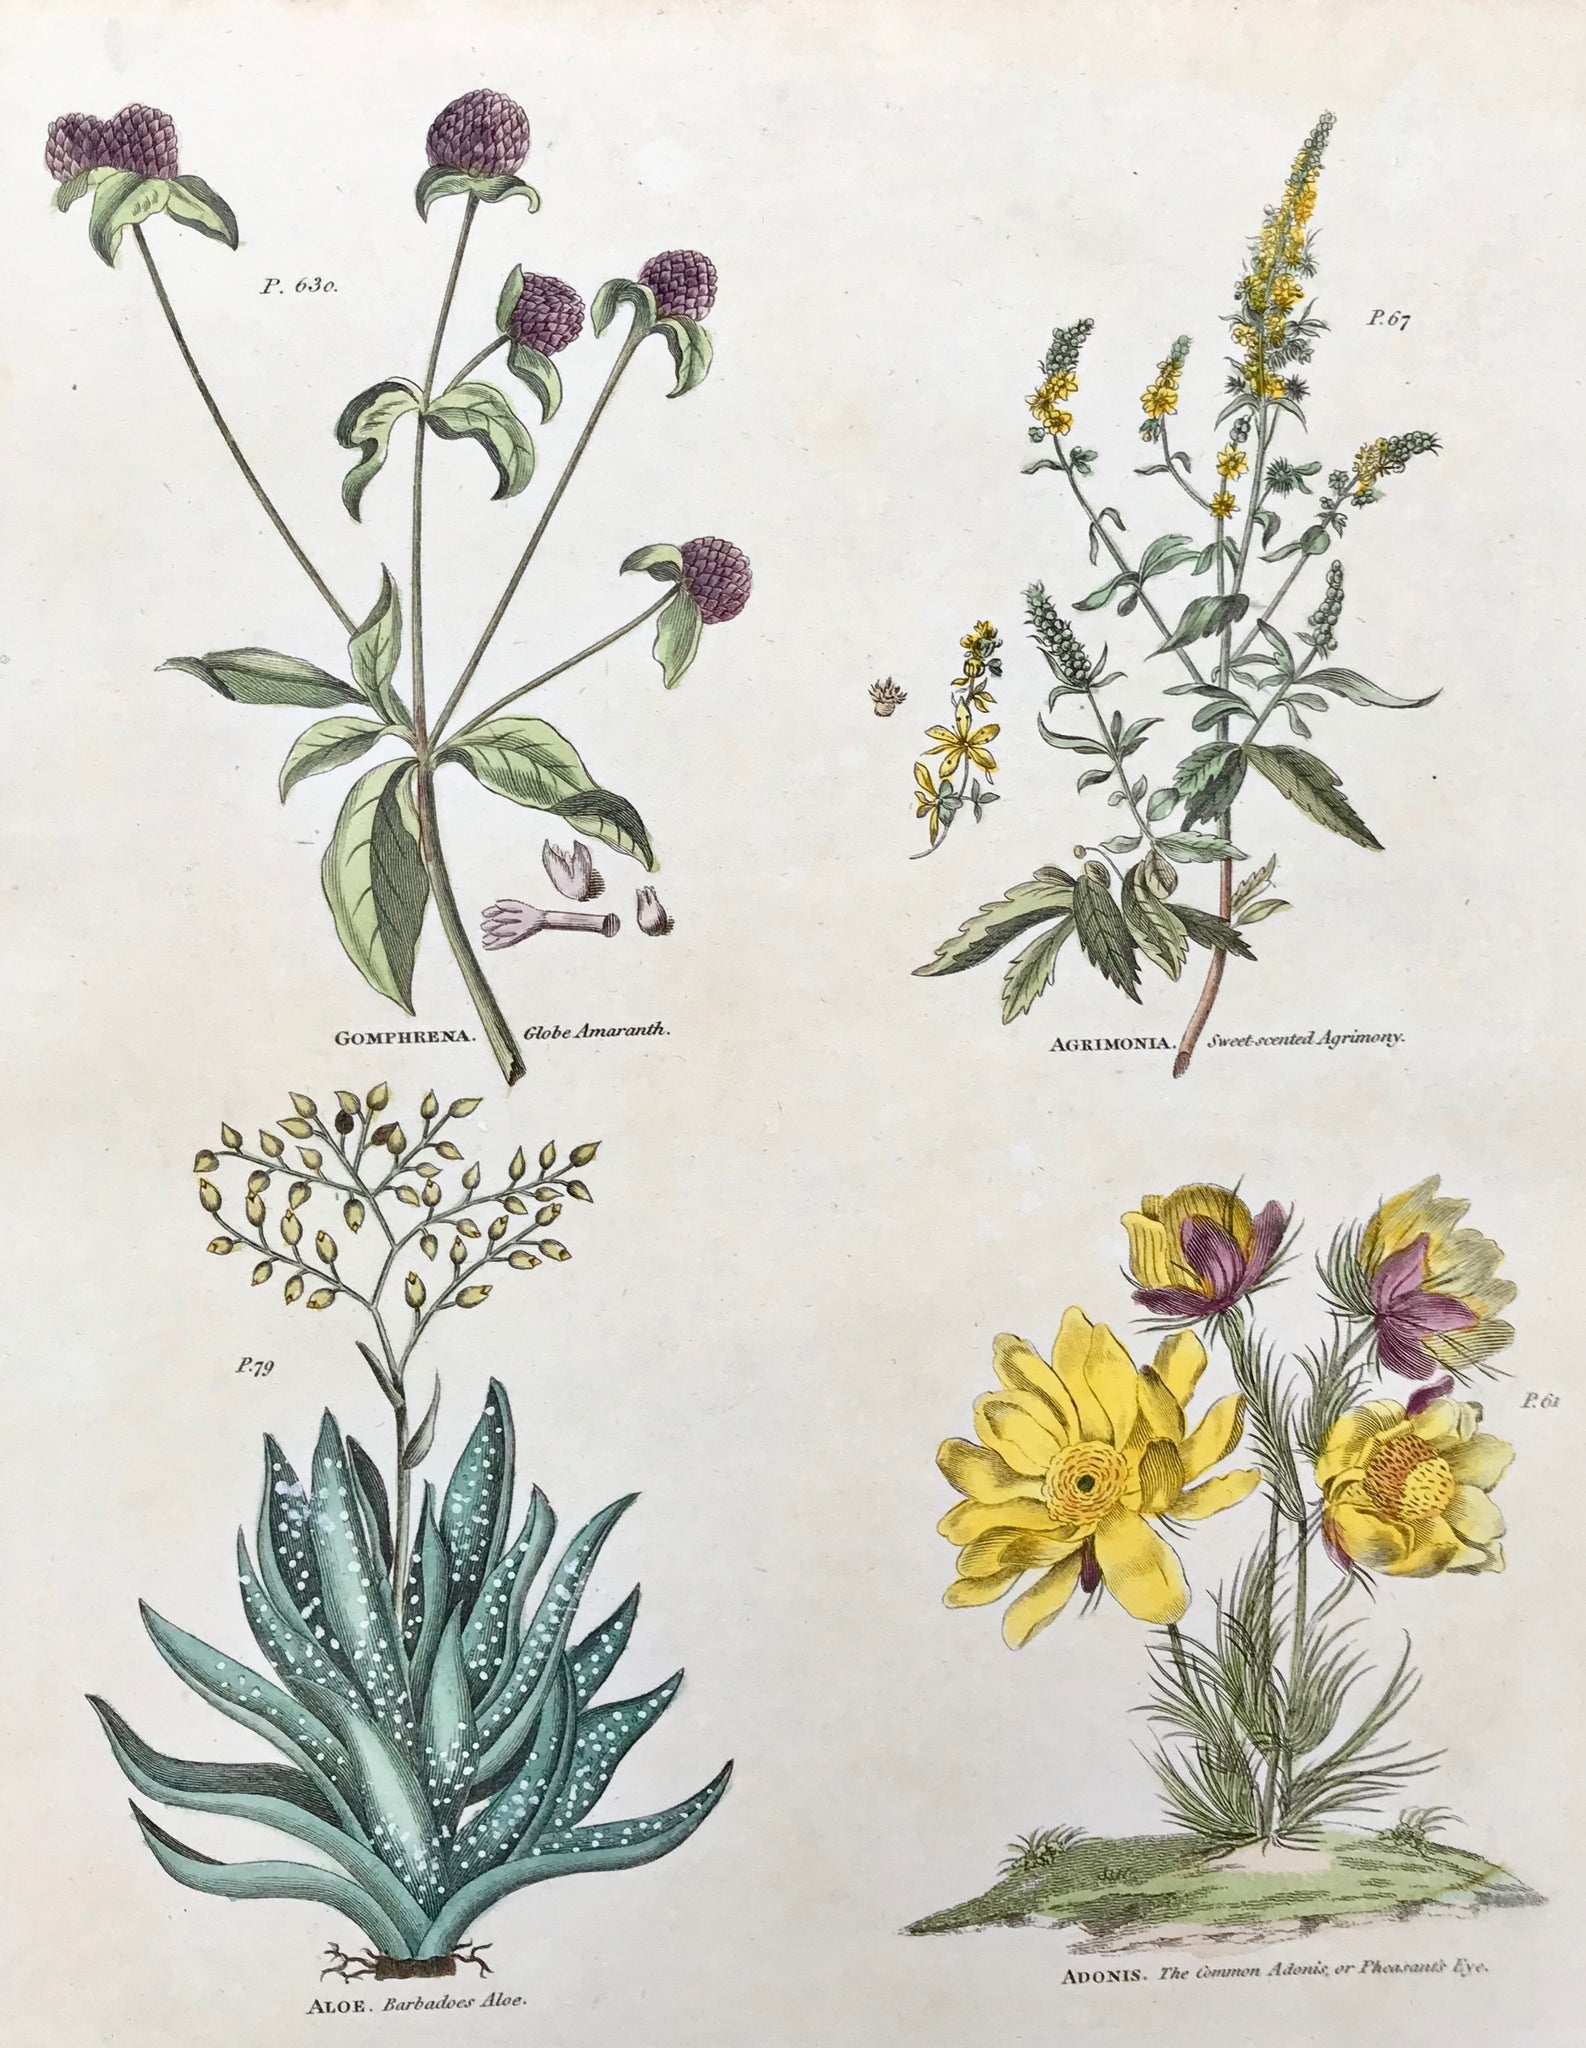     Upper left: Gomphrena Globe Amaranth Upper right: Agrimonia Sweet-scented Agrimony Lower left: Aloe Barbadoes Aloe Lower right: Adonis. The Common Adonis or Pheasant's Eye.  Antique Botanical Prints from "The Universal Herbal" by Thomas Green.  The complete title of this accurately and absolutely delightfully hand-colored work is: "The Universal Herbal", or Botanical, Medical, and Agricultural Dictionary, containing an Accoun